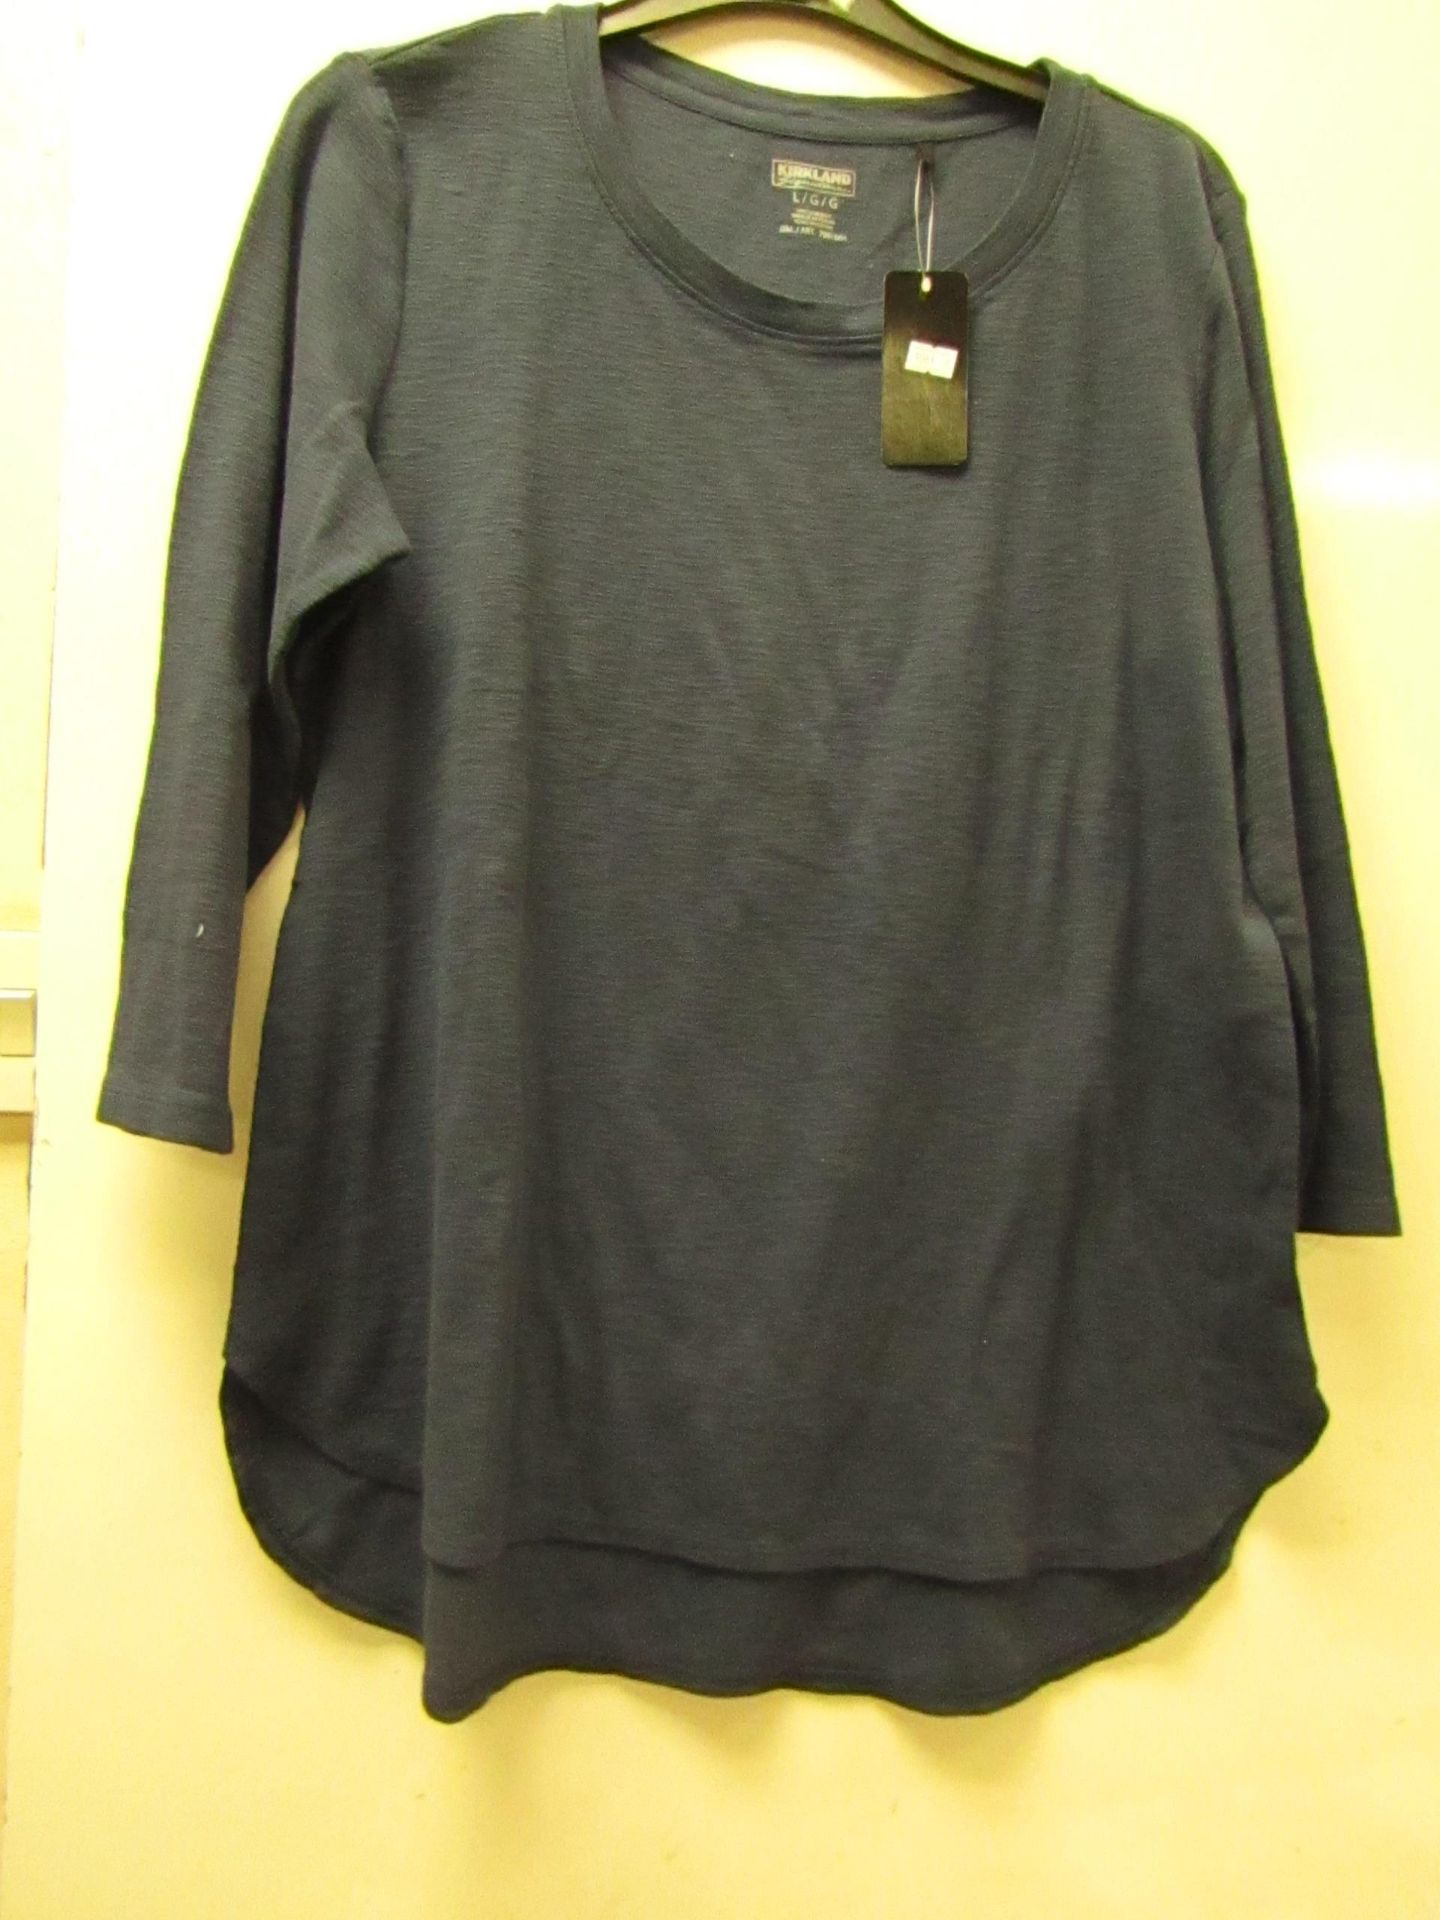 1 x Kirkland Signature Ladies 3/4 Sleeve Top size L new with tag